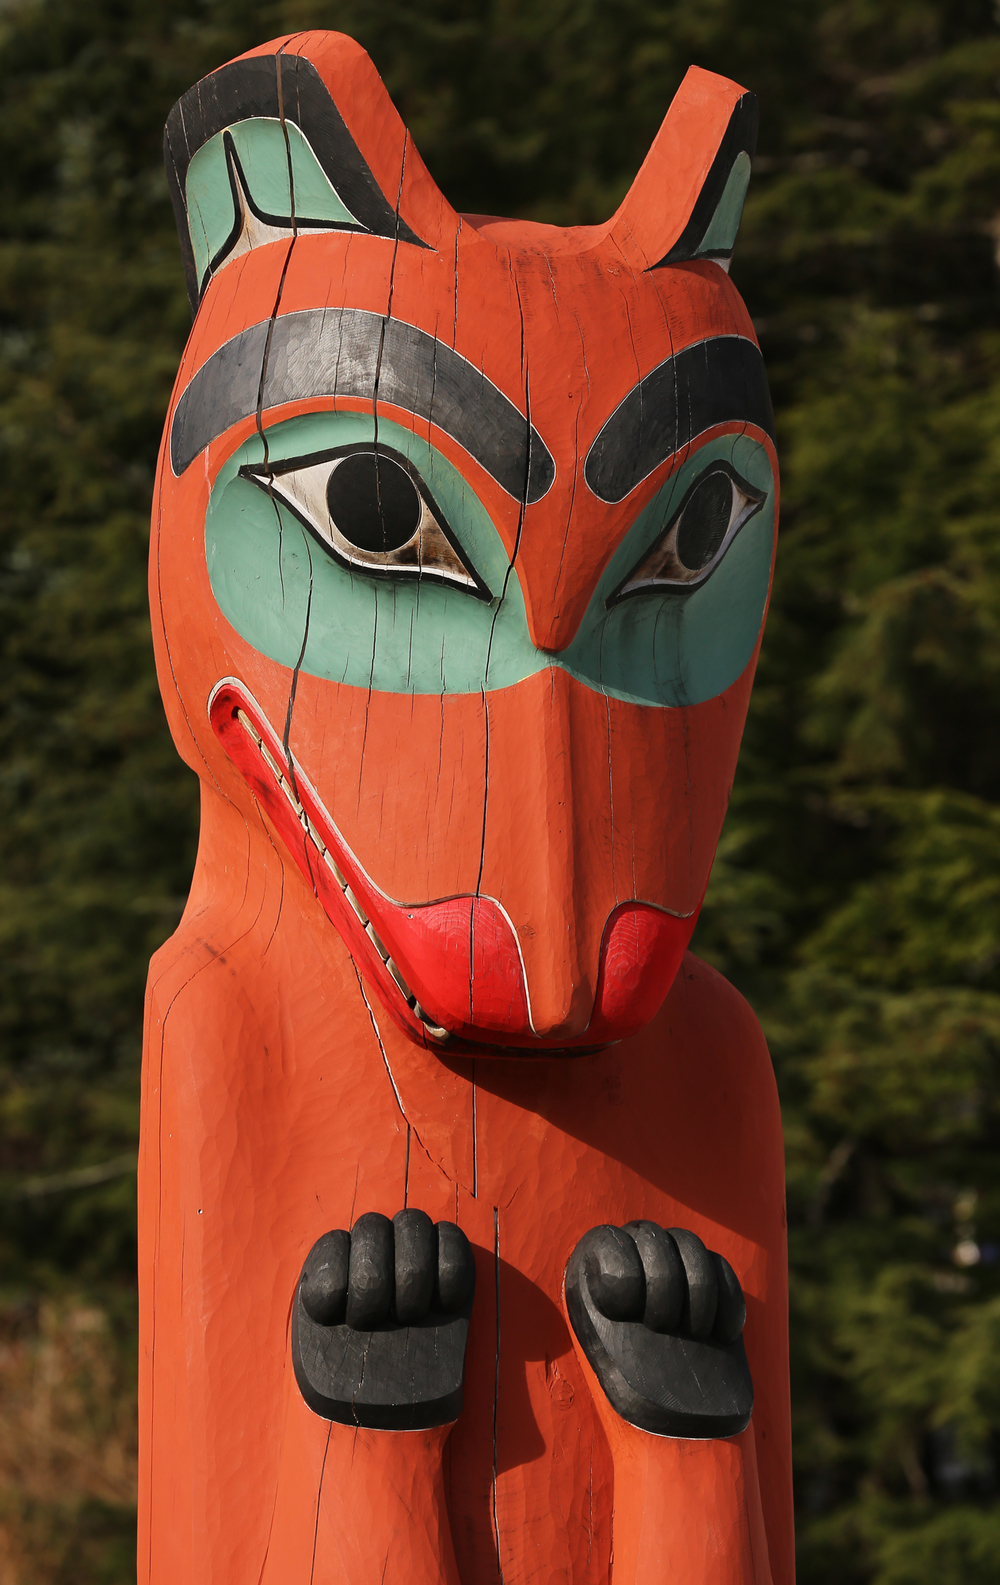 This bear totem is a reproduction carved by Donald Varnell, who says that he likes to "push the form." He brings in strong relief, lively curves, and an animated tension to his work.